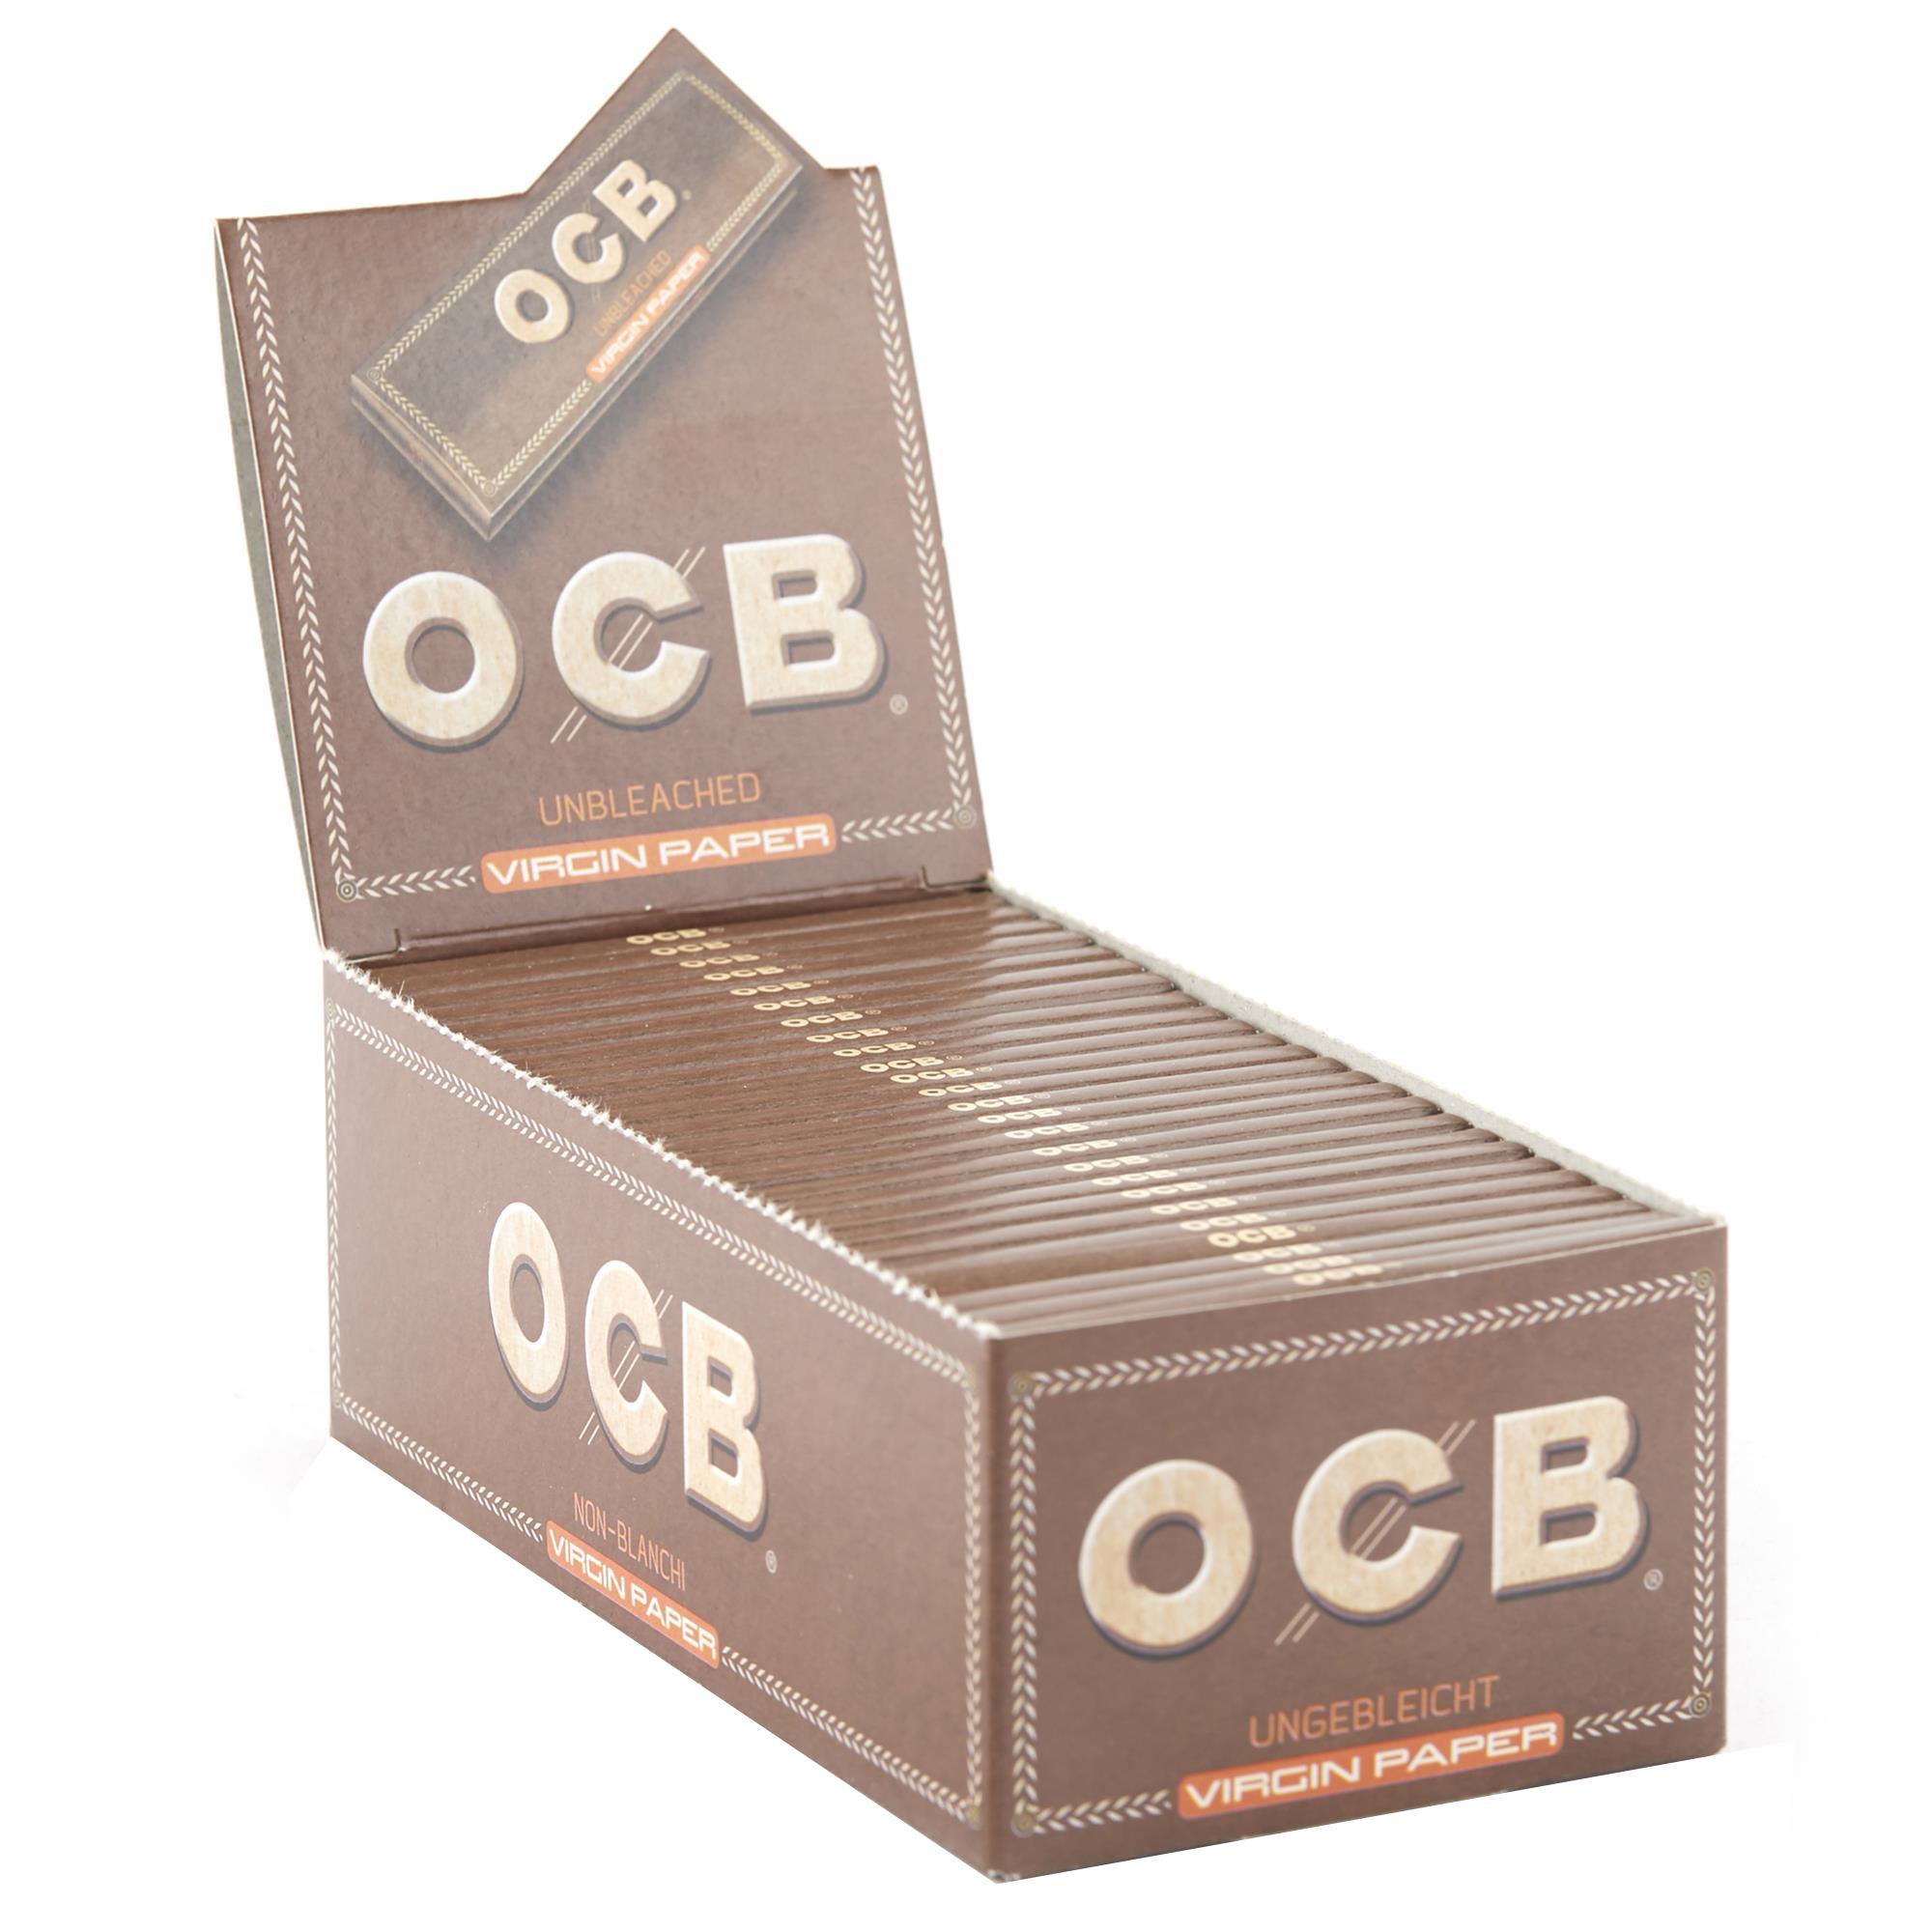 OCB Virgin Full Box 24 Books unbleached Rolling Papers Single Wide 